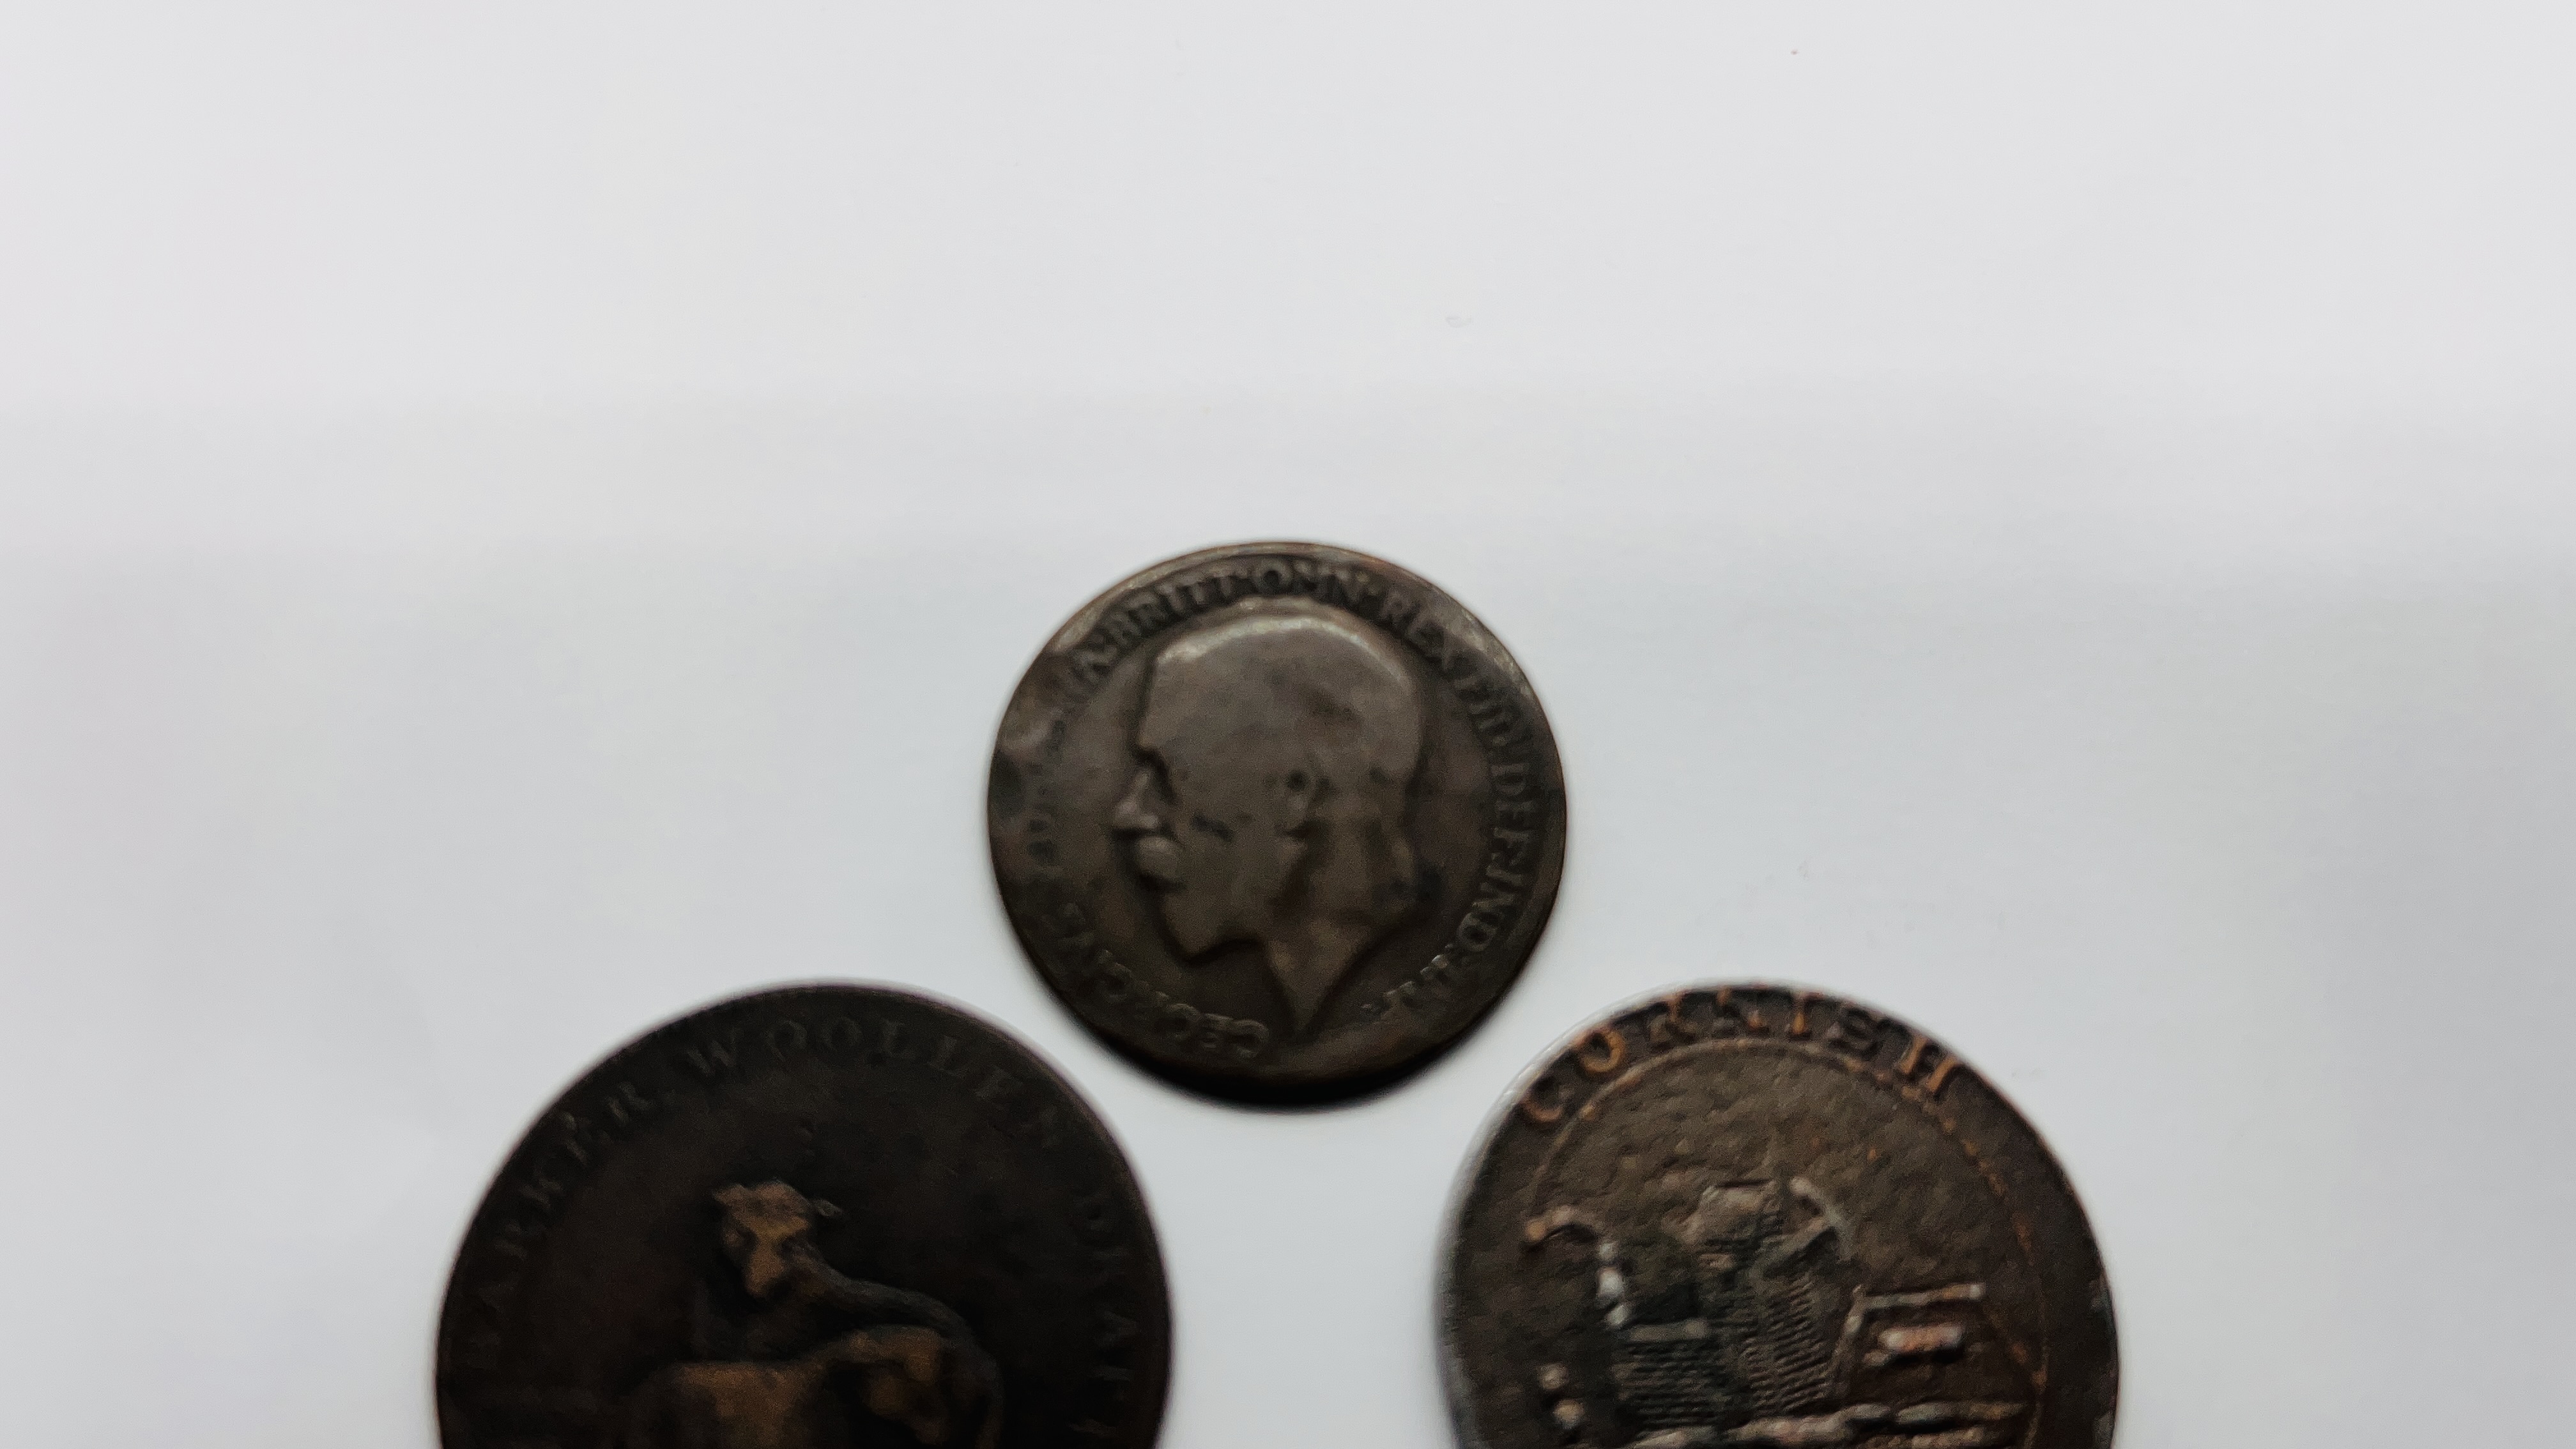 A NORWICH TOKEN 1811, A CORNISH PENNY 1811 AND A DOUBLE HEADED PENNY. - Image 2 of 5